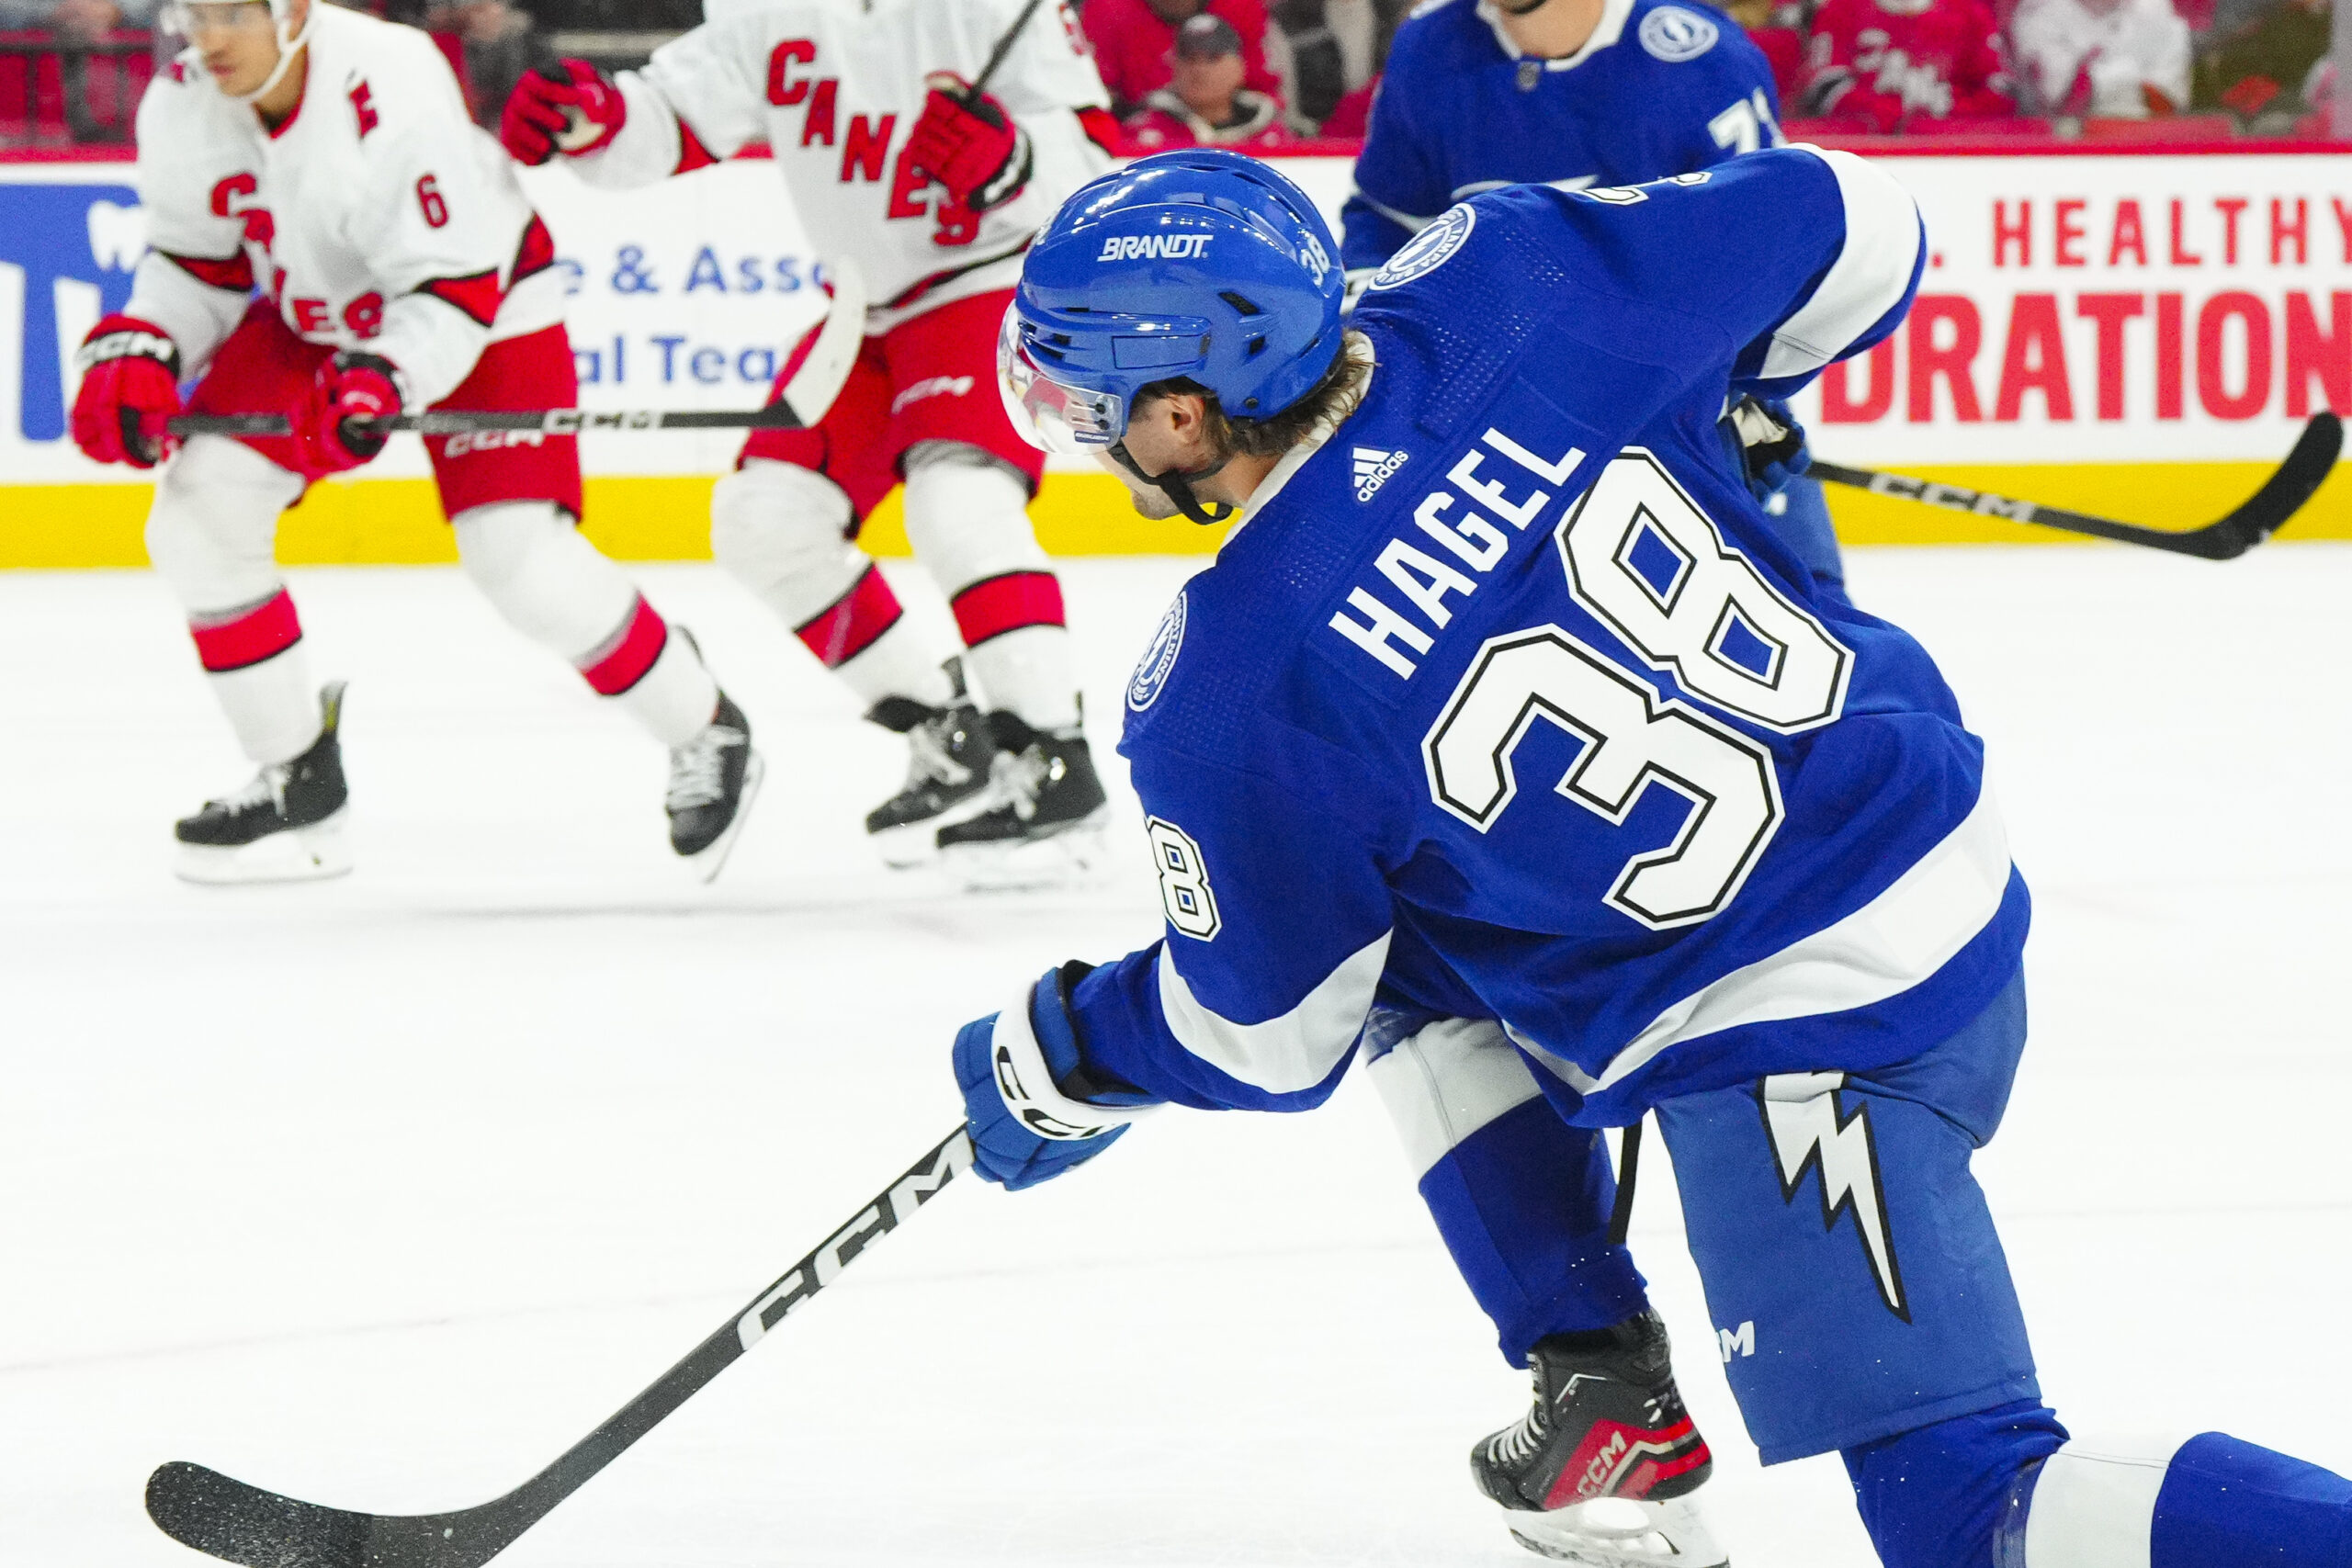 How many Canadian Players on Tampa Bay Lightning?